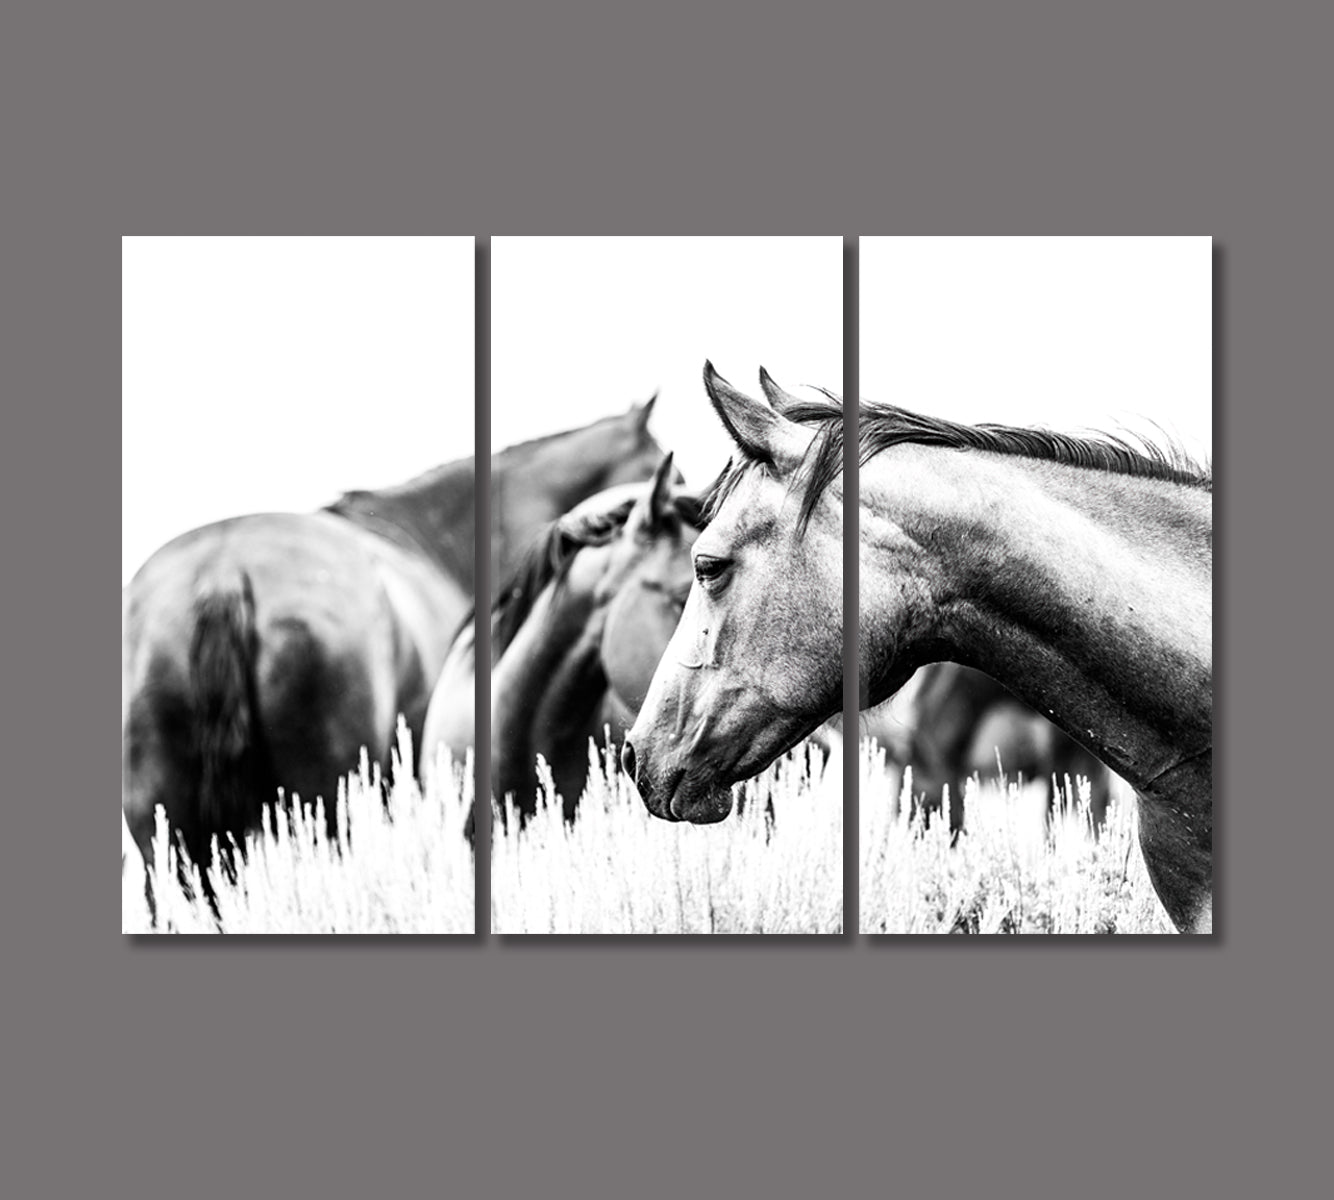 Herd of Horses in Black and White Canvas Print-Canvas Print-CetArt-3 Panels-36x24 inches-CetArt